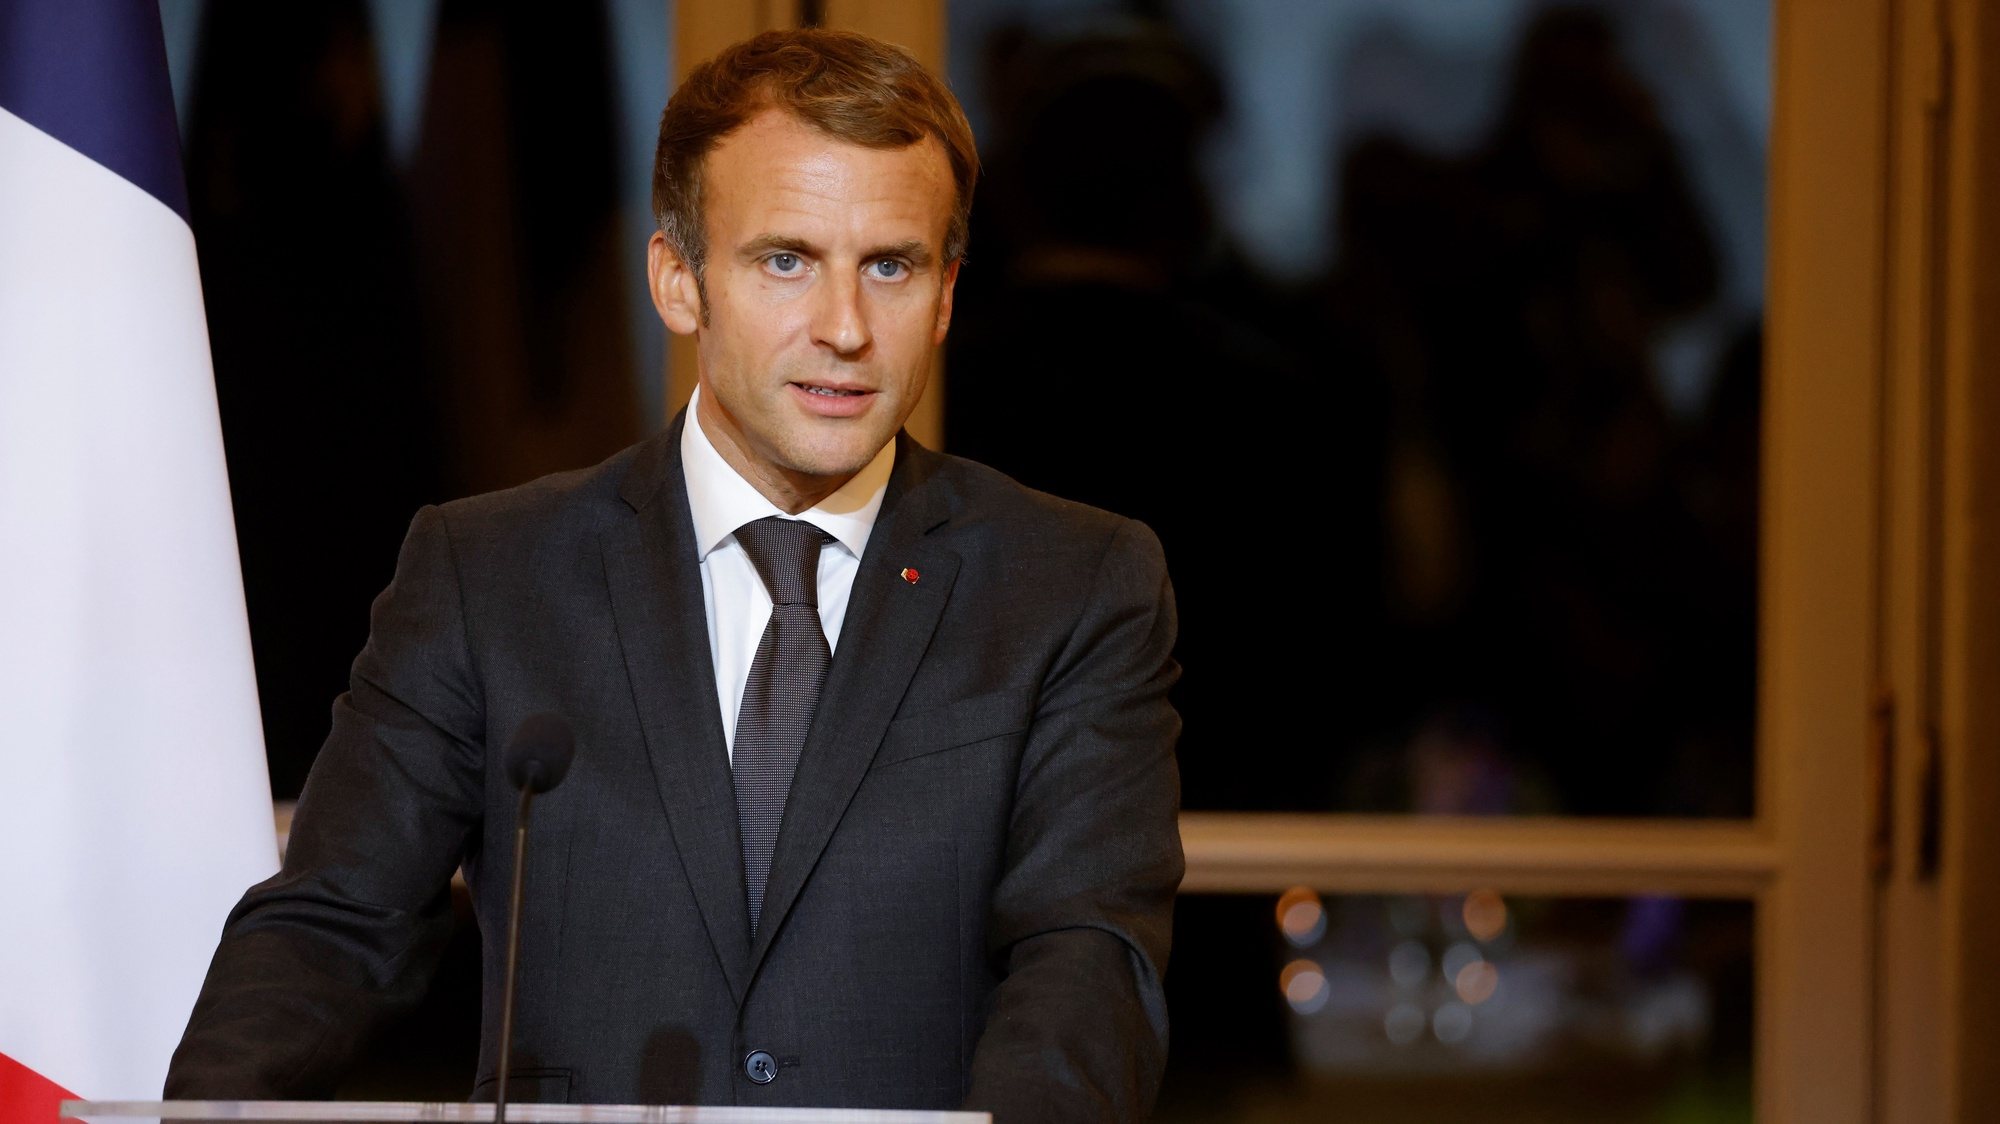 epa09498366 French President Emmanuel Macron delivers a speech as he hosts a dinner at the Elysee Palace as part of the closing ceremony of the Africa2020 season, which presented the views of the civil society from the African continent and its recent diaspora in different sectors of activity in Paris, France, 30 September 2021. - The Season 2020 focused on innovation in the arts, sciences, technology, entrepreneurship and the economy.  EPA/LUDOVIC MARIN / POOL  MAXPPP OUT